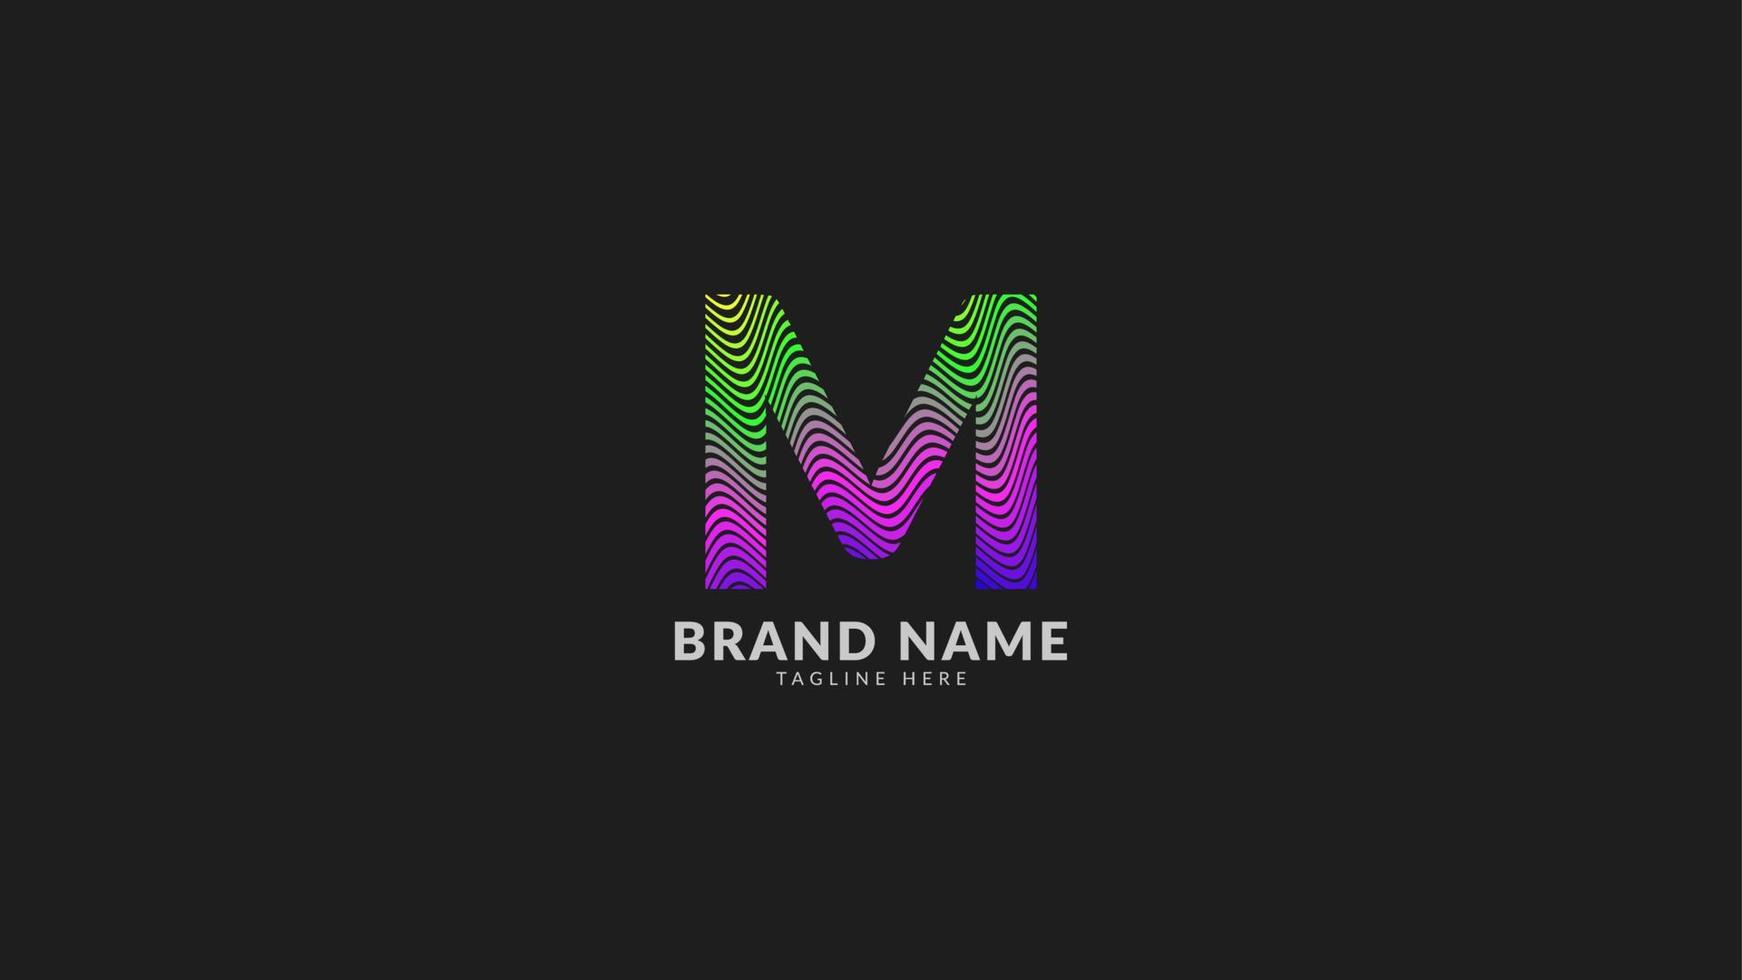 letter M wavy rainbow abstract colorful logo for creative and innovative company brand. print or web vector design element